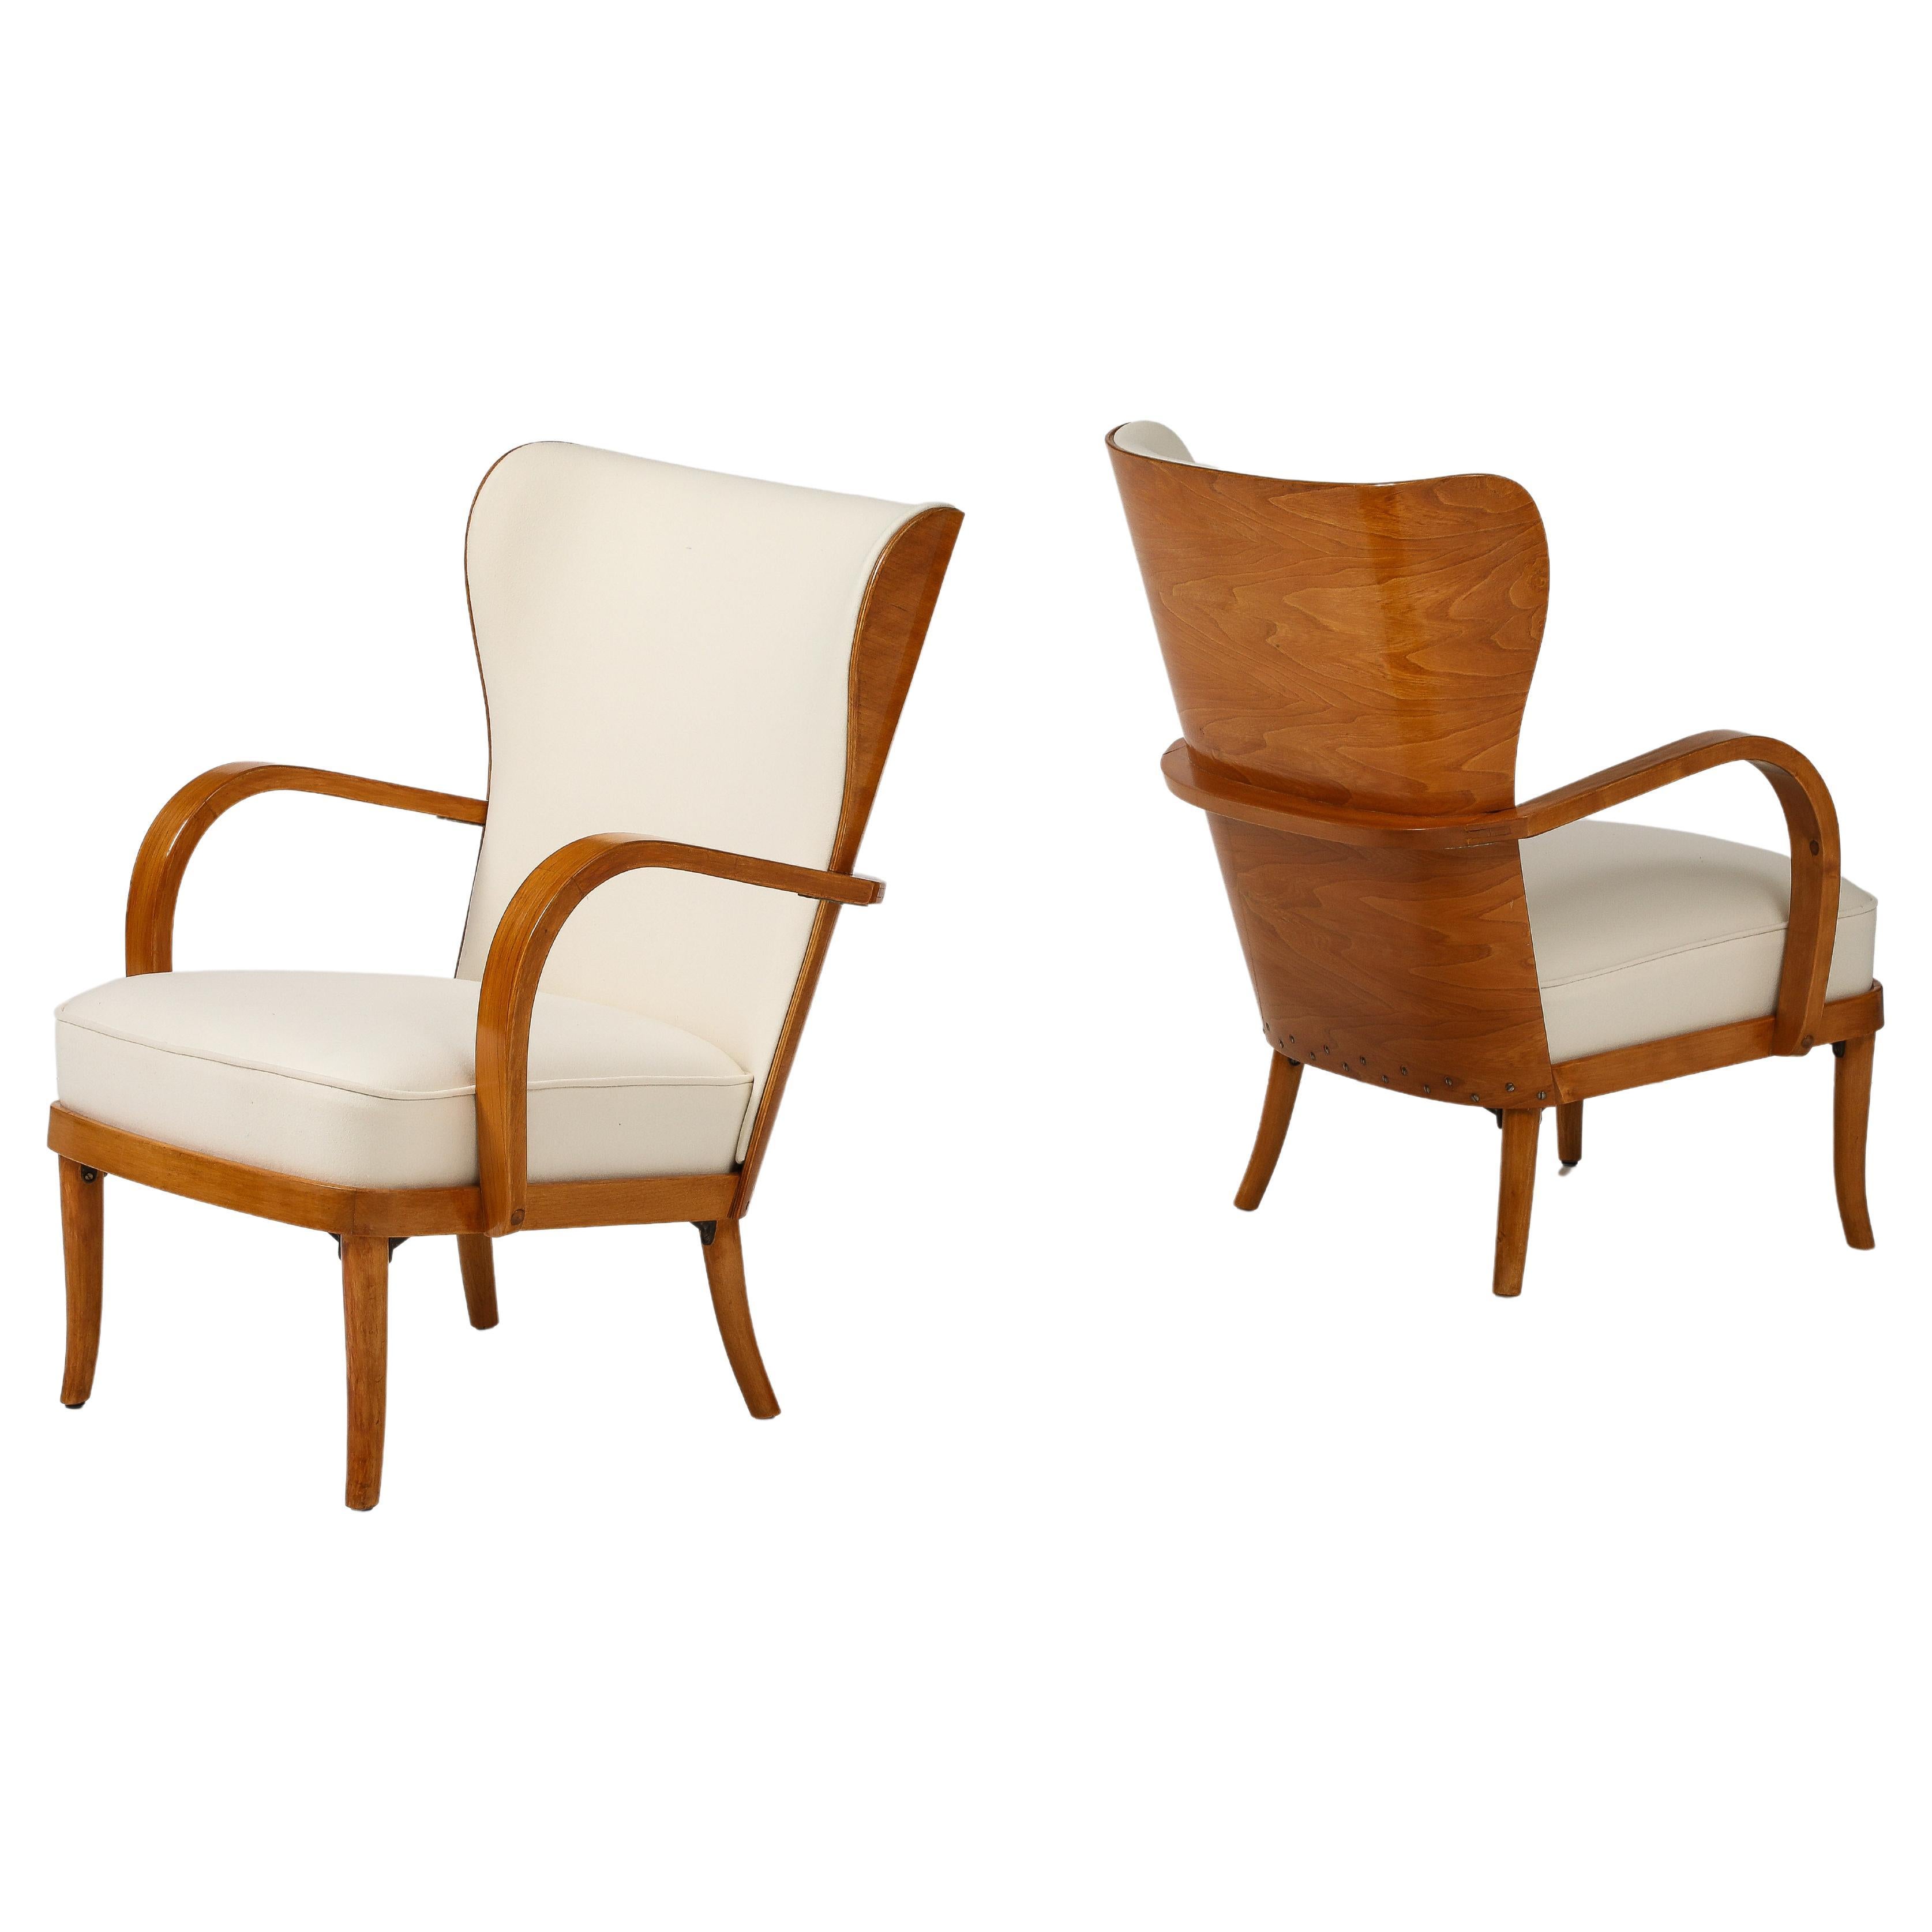 A Pair of Werner West Open Armchairs, Circa 1930s For Sale